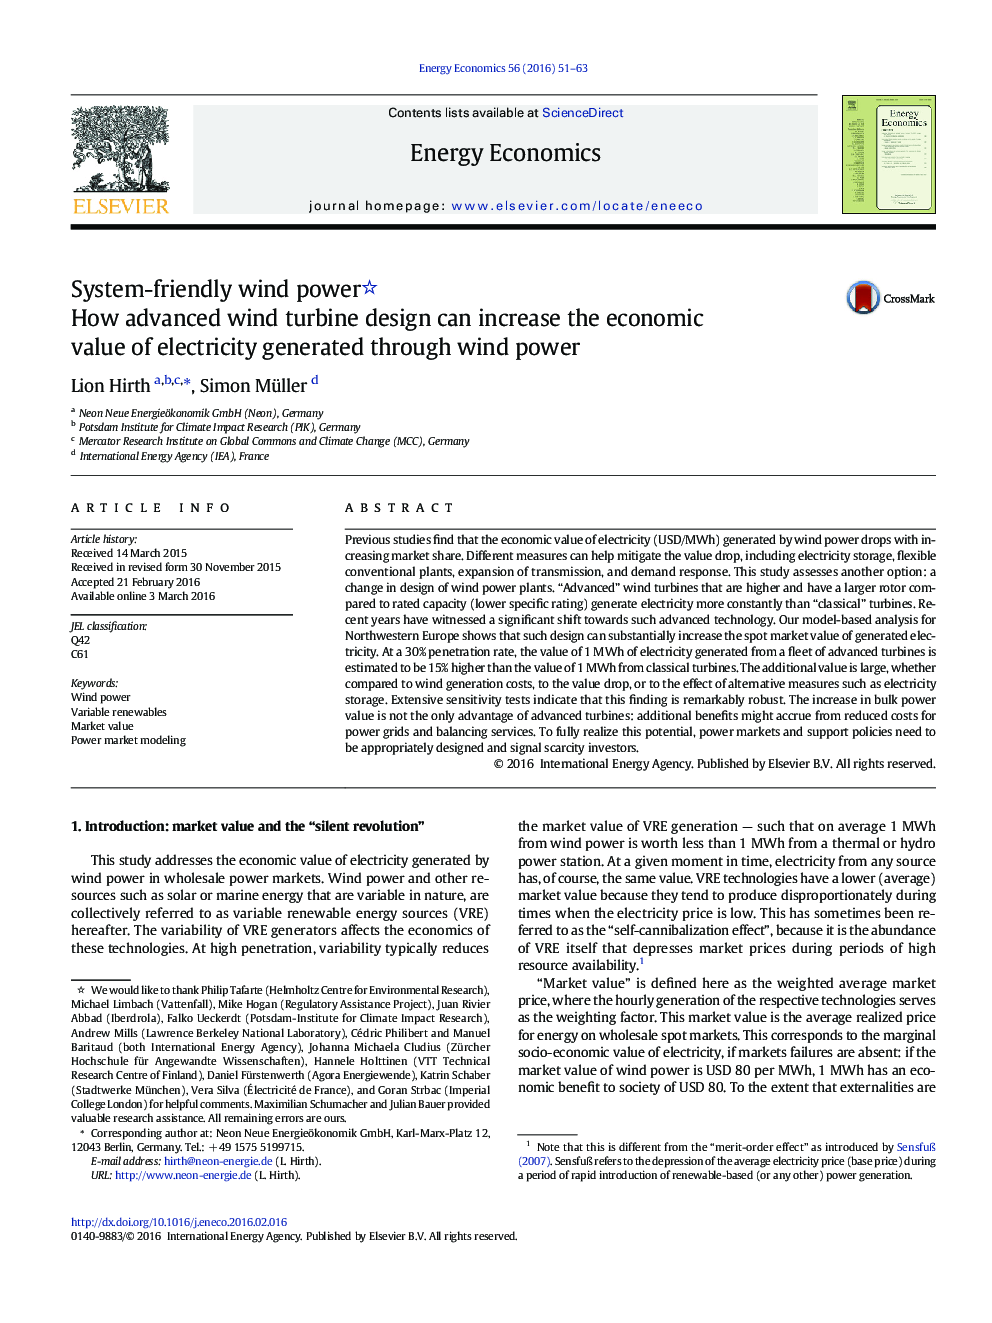 System-friendly wind power: How advanced wind turbine design can increase the economic value of electricity generated through wind power